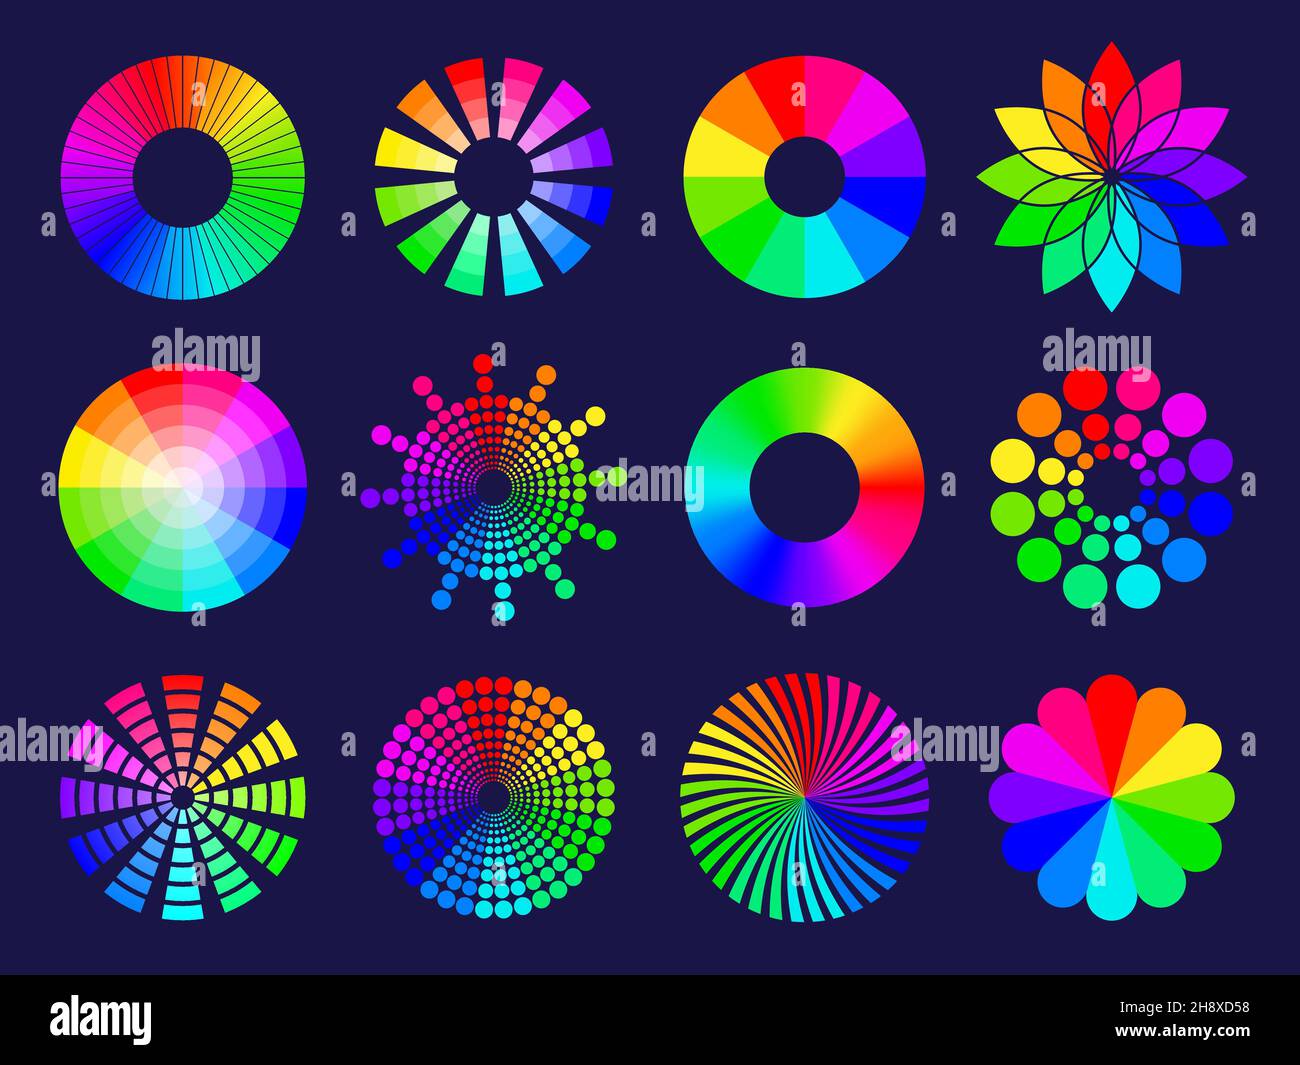 Rgb circles. Round abstract shapes selective colored spectrum waves frequency wheels rgb palletes recent vector stylized symbols Stock Vector